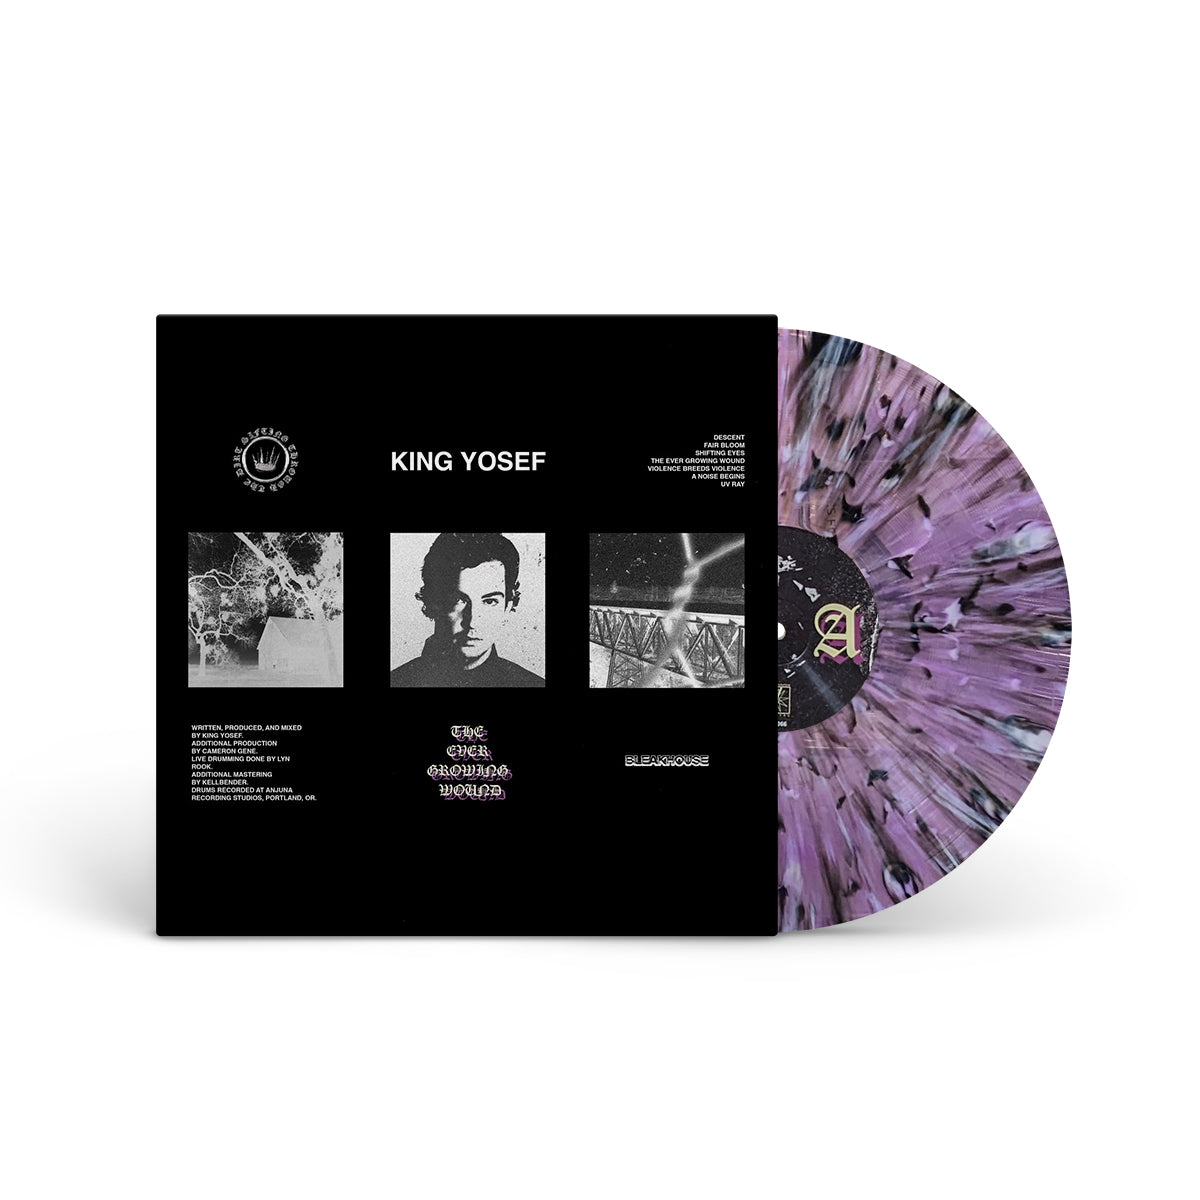 KING YOSEF "The Ever Growing Wound" LP